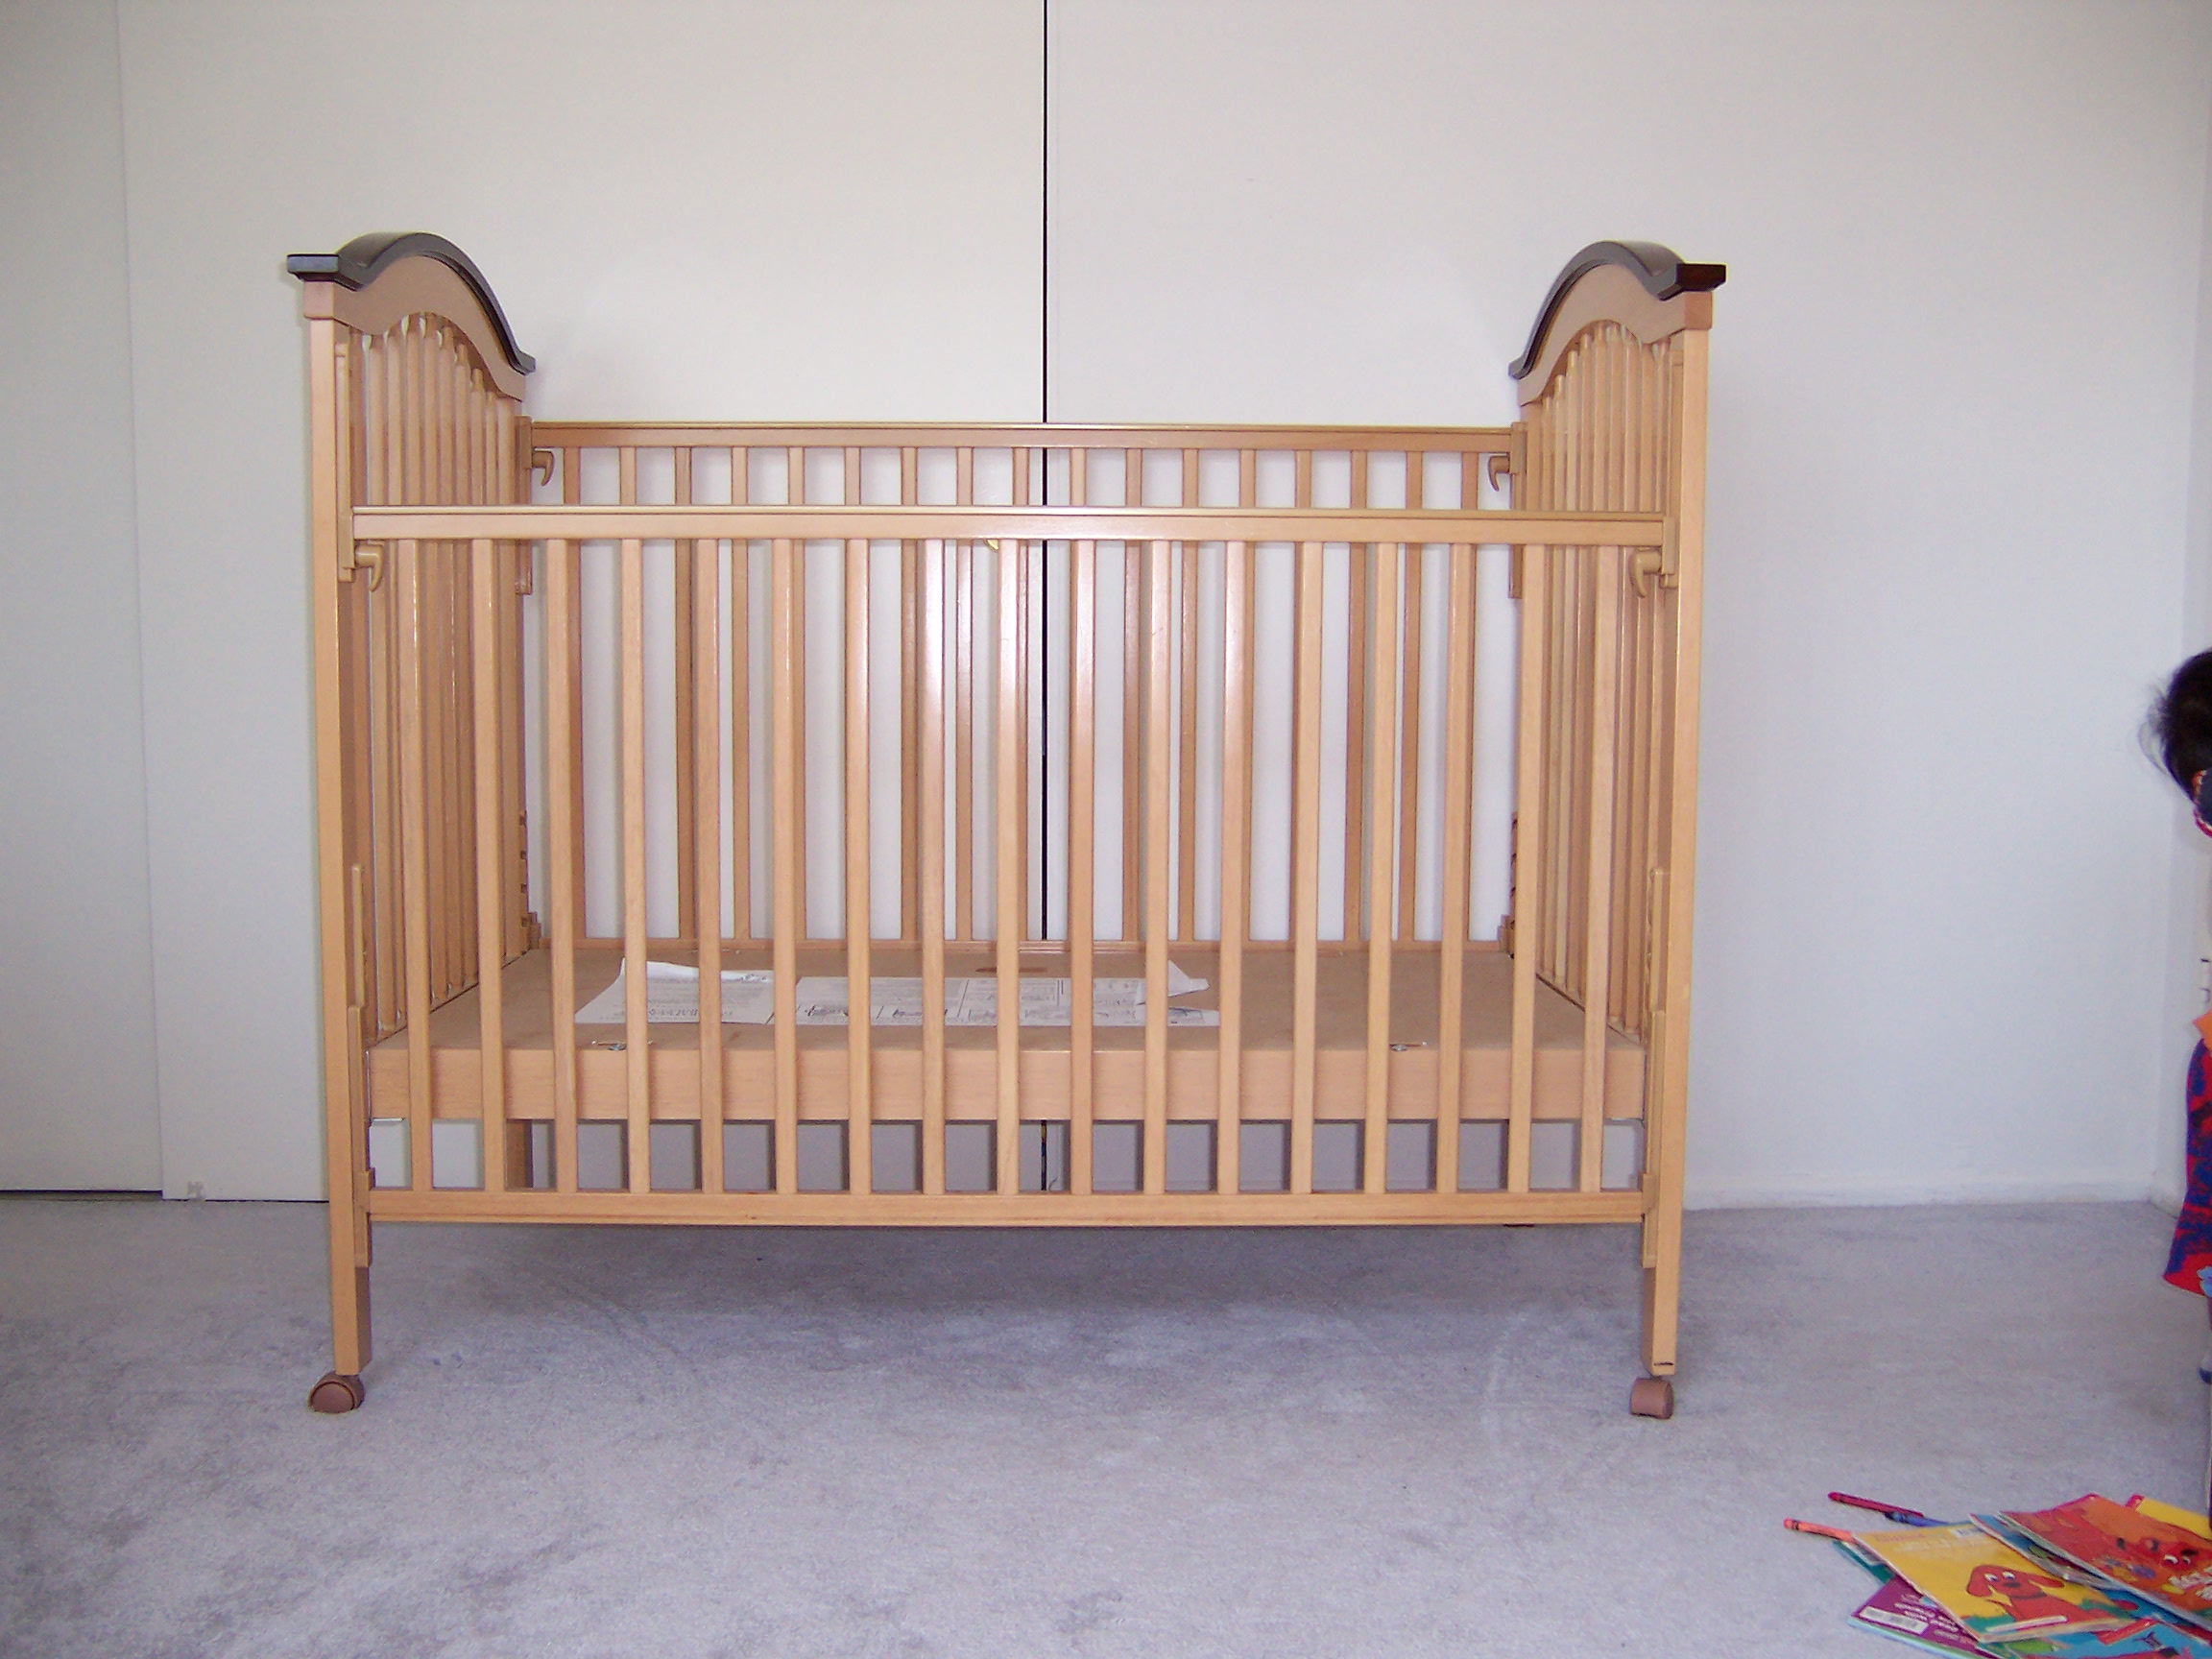 used cribs for sale near me